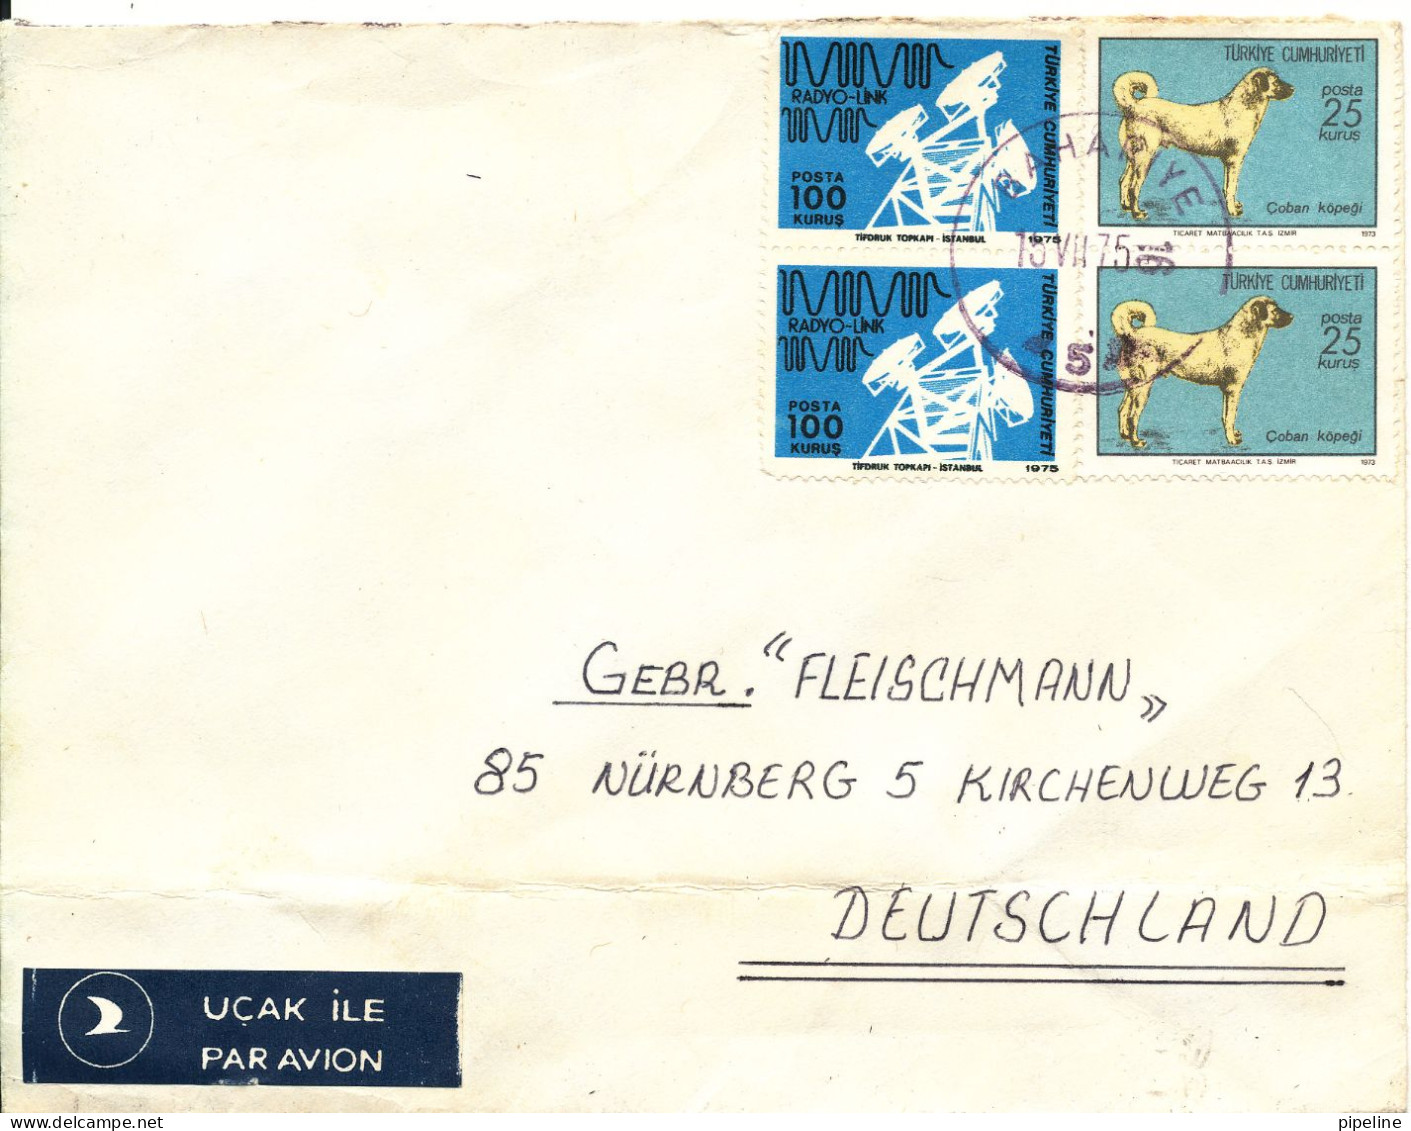 Turkey Cover Sent Air Mail To Germany 15-7-1975 (the Cover Is Folded At The Bottom) - Briefe U. Dokumente